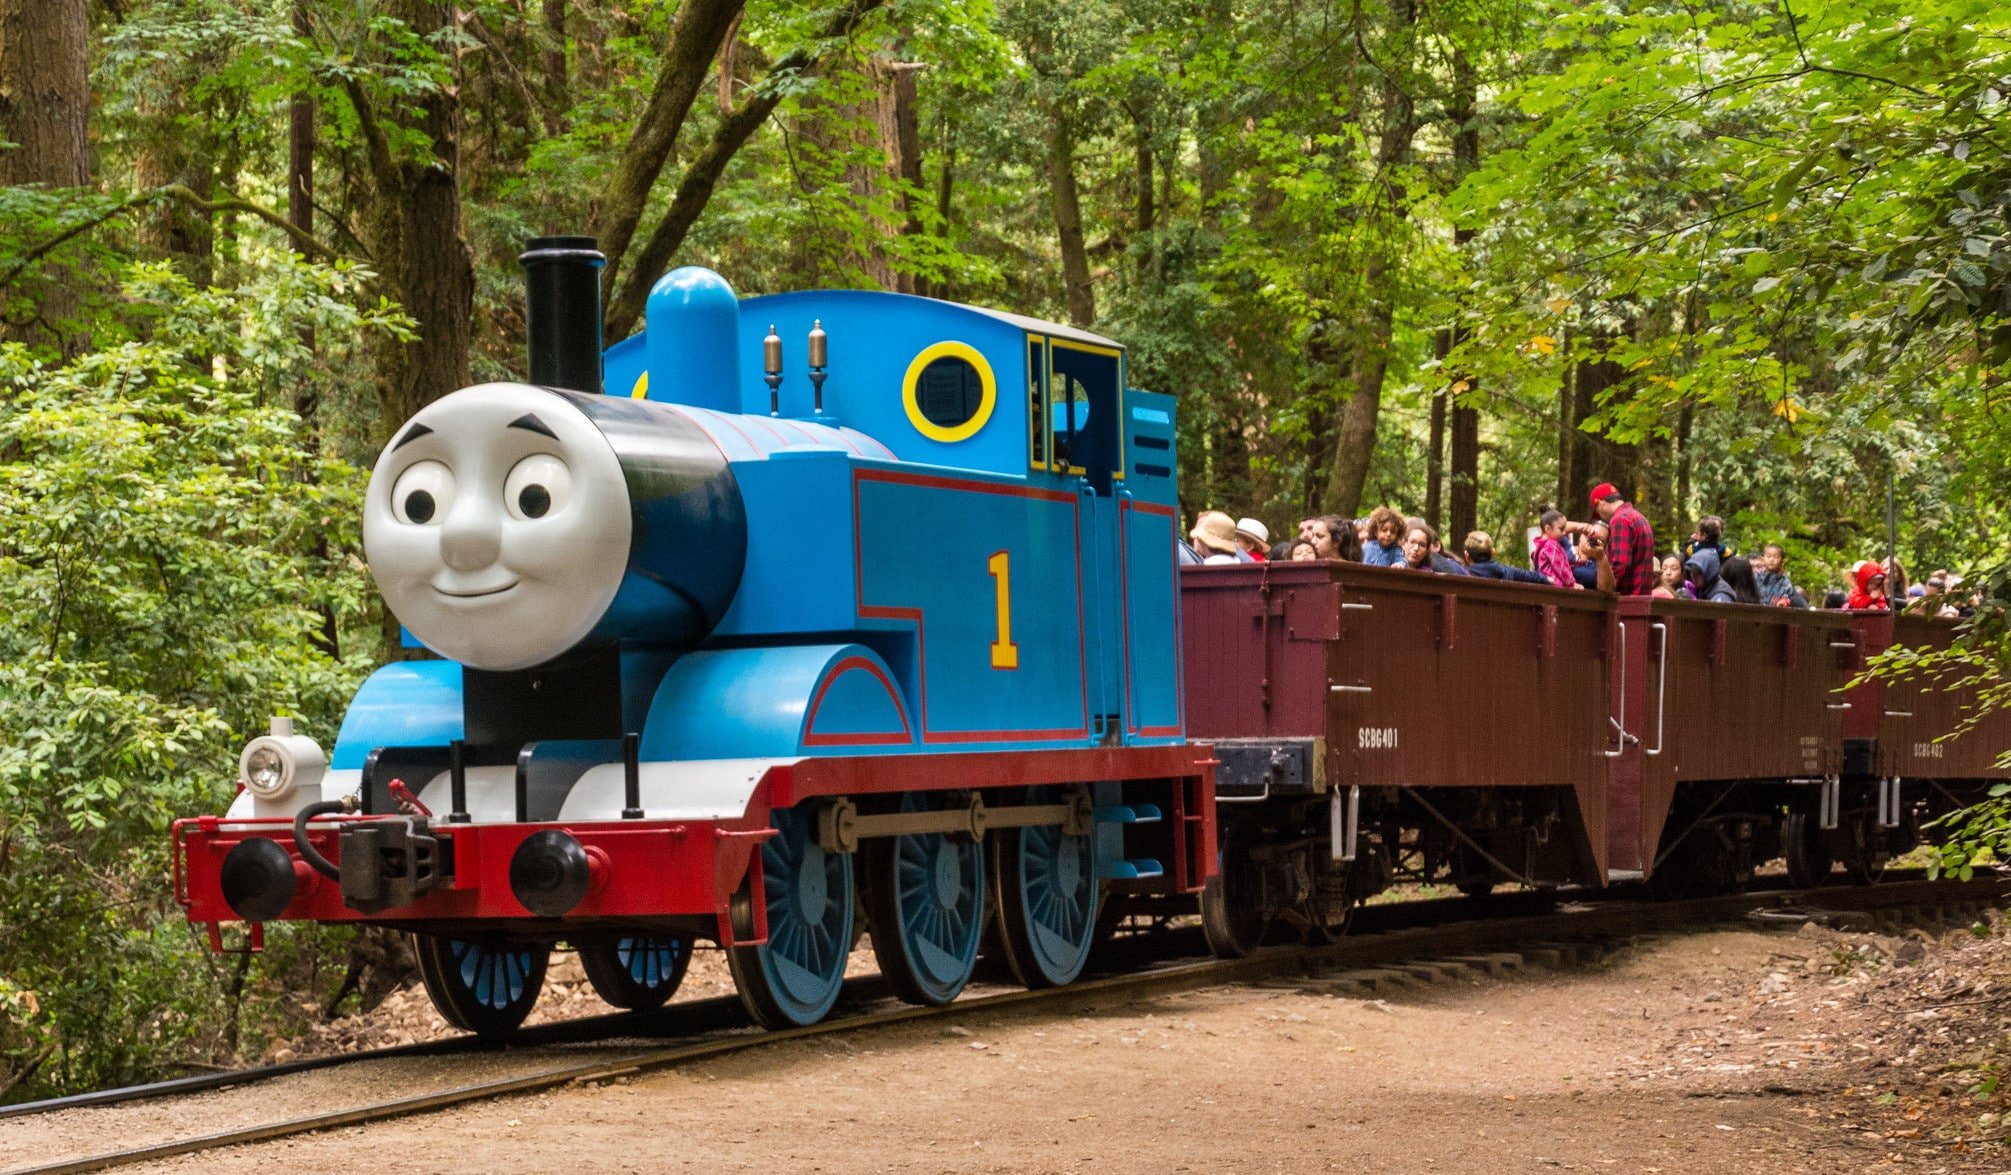 A bright blue locomotive that looks like Thomas the Train Engine pulls an open-air passenger car filled with people